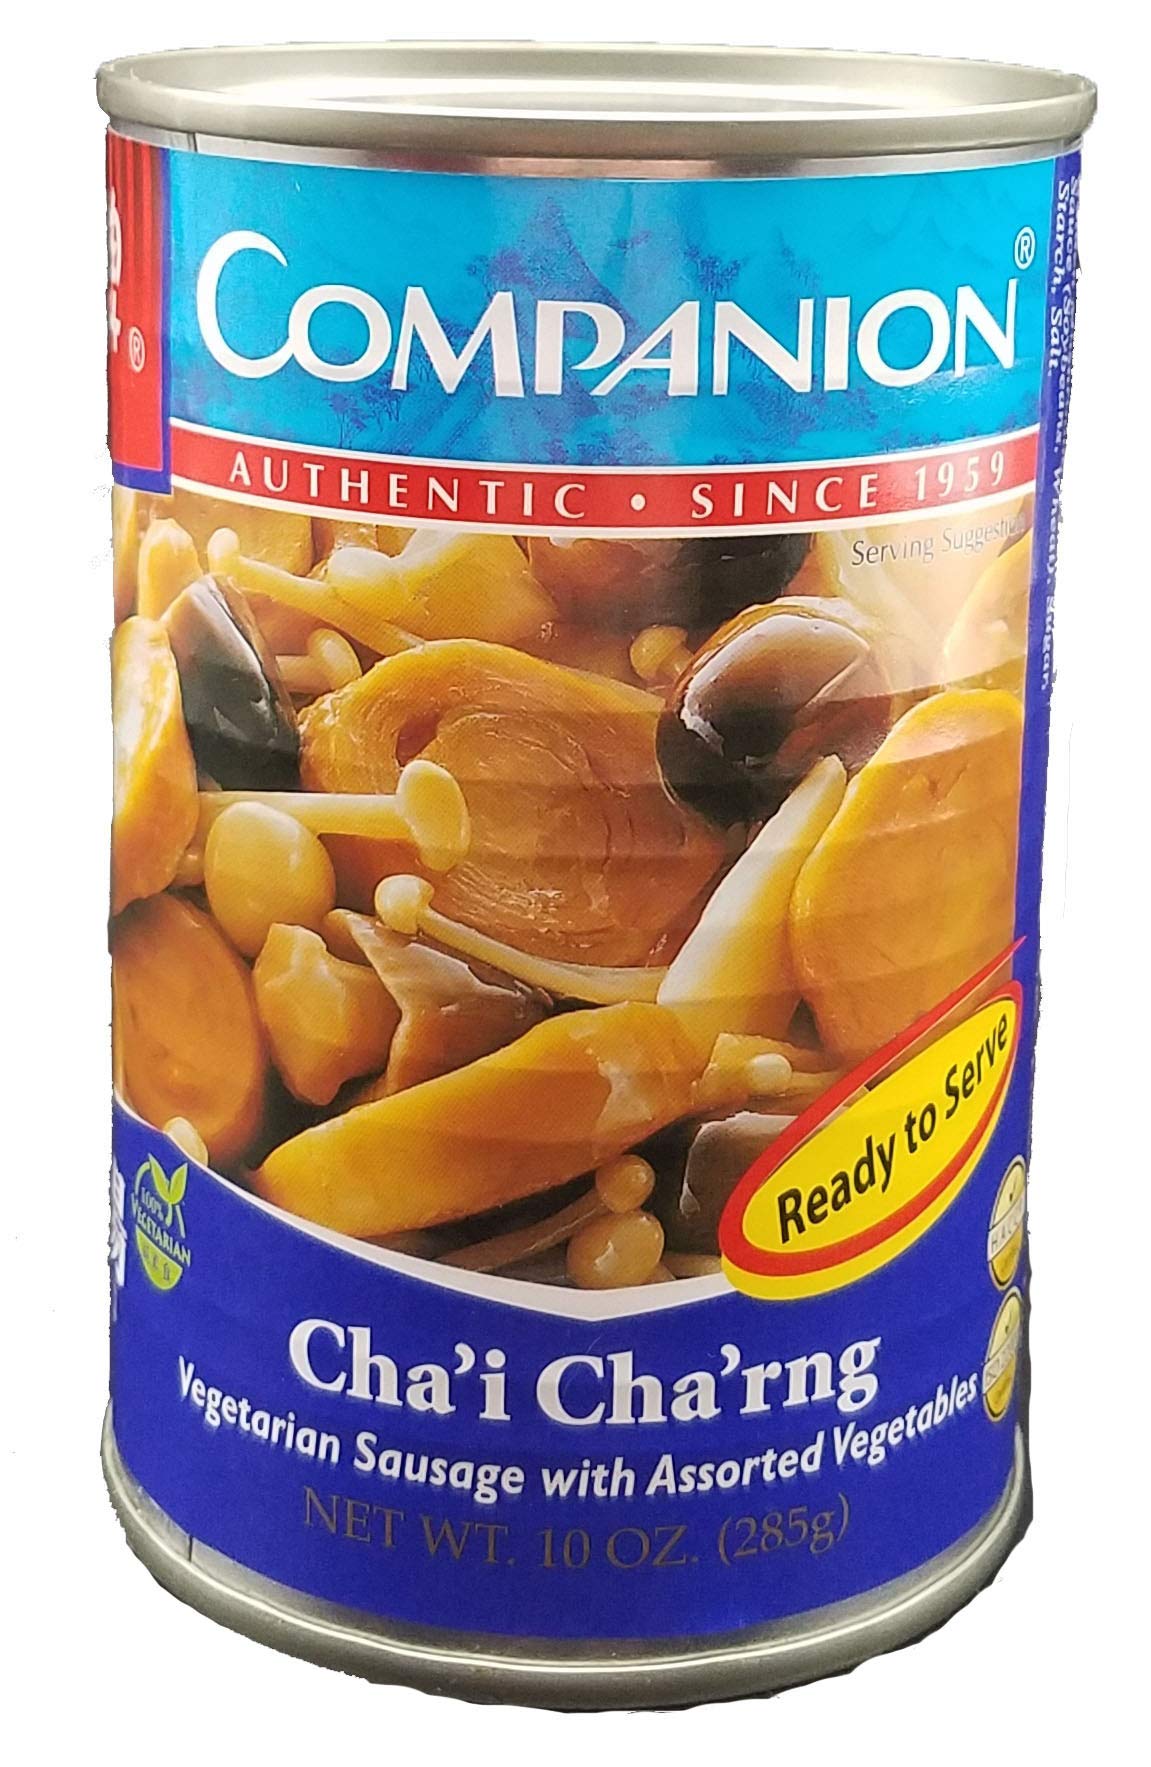 Companion Foods Canned Vegan Chinese Sausage